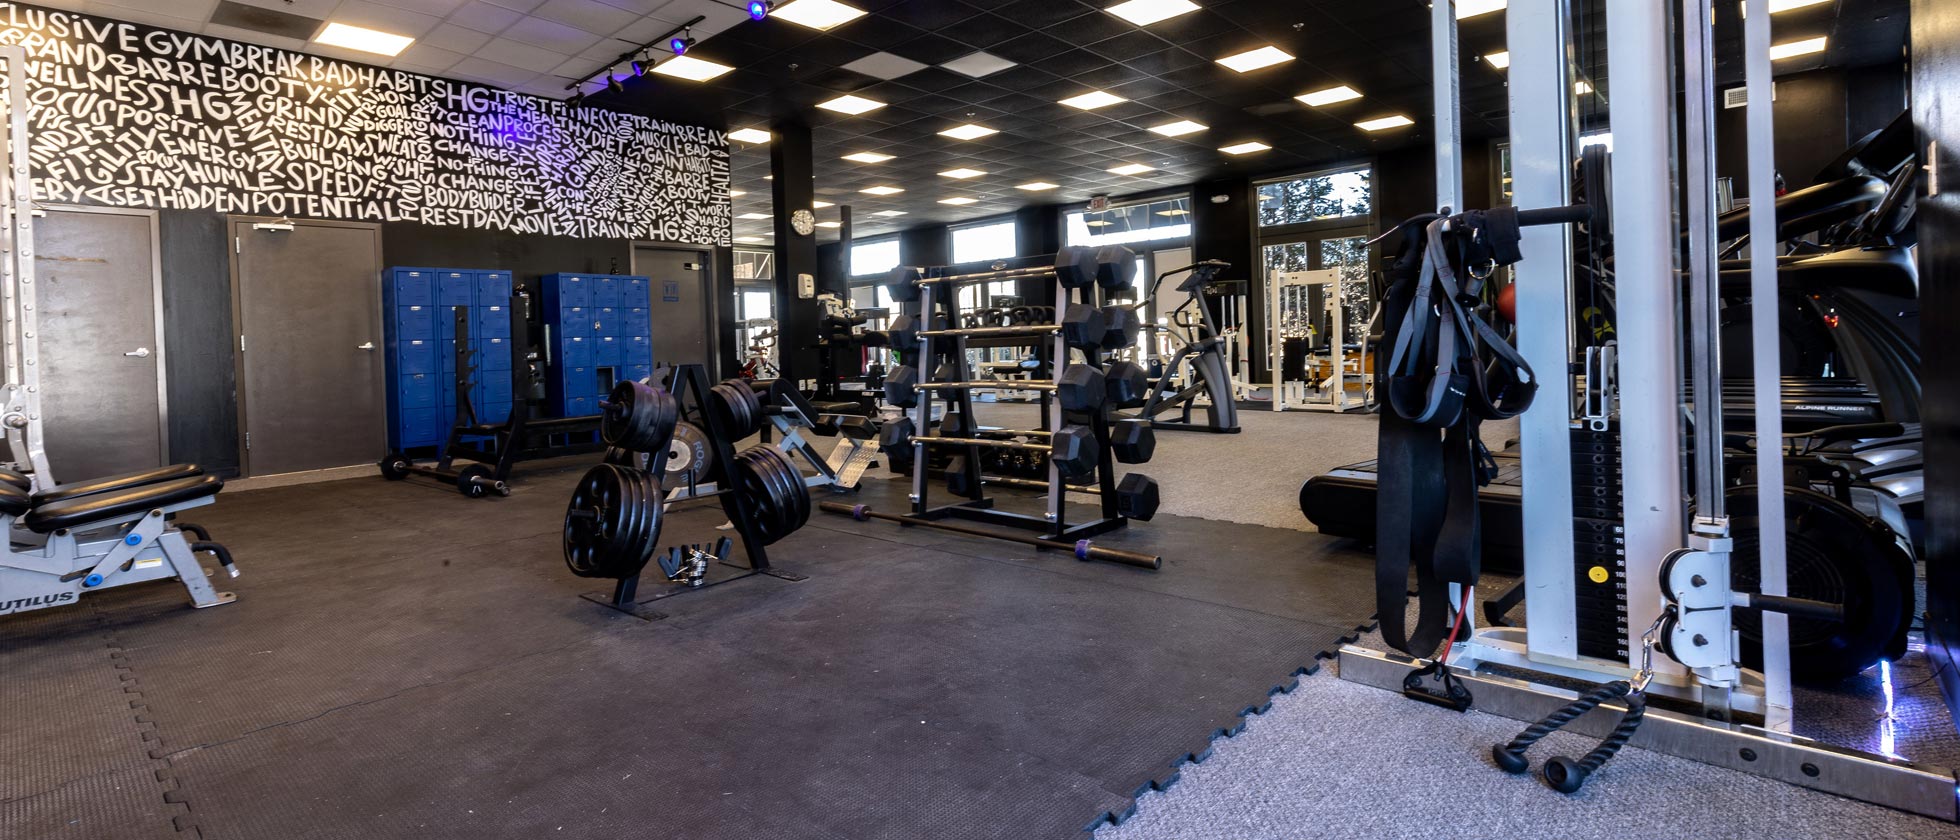 A Gym Near West Midtown That Can Help You Lose Weight and Get Fit